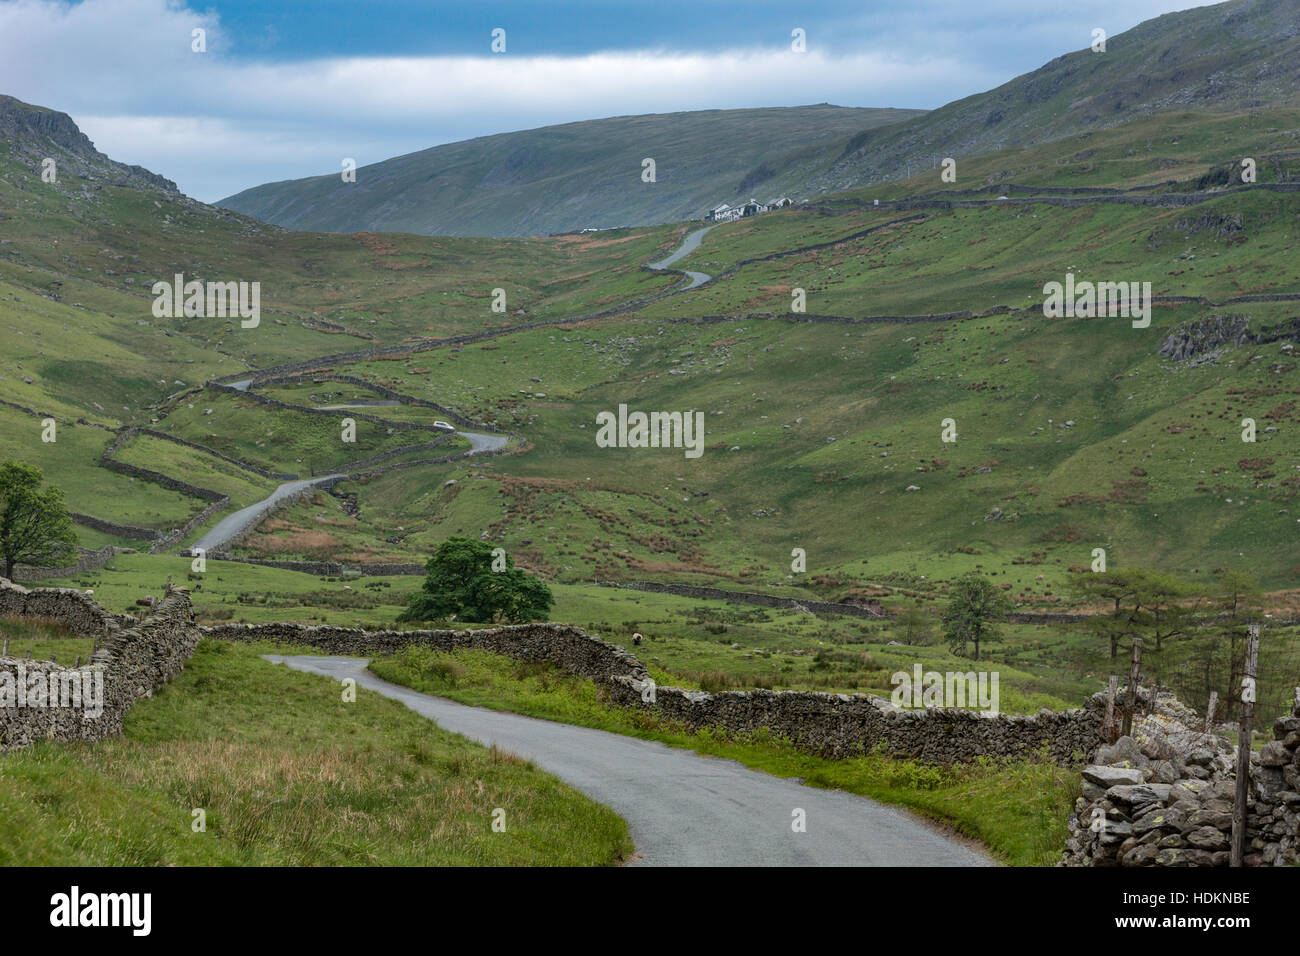 Long road winds through wide Lake District landscape. Stock Photo